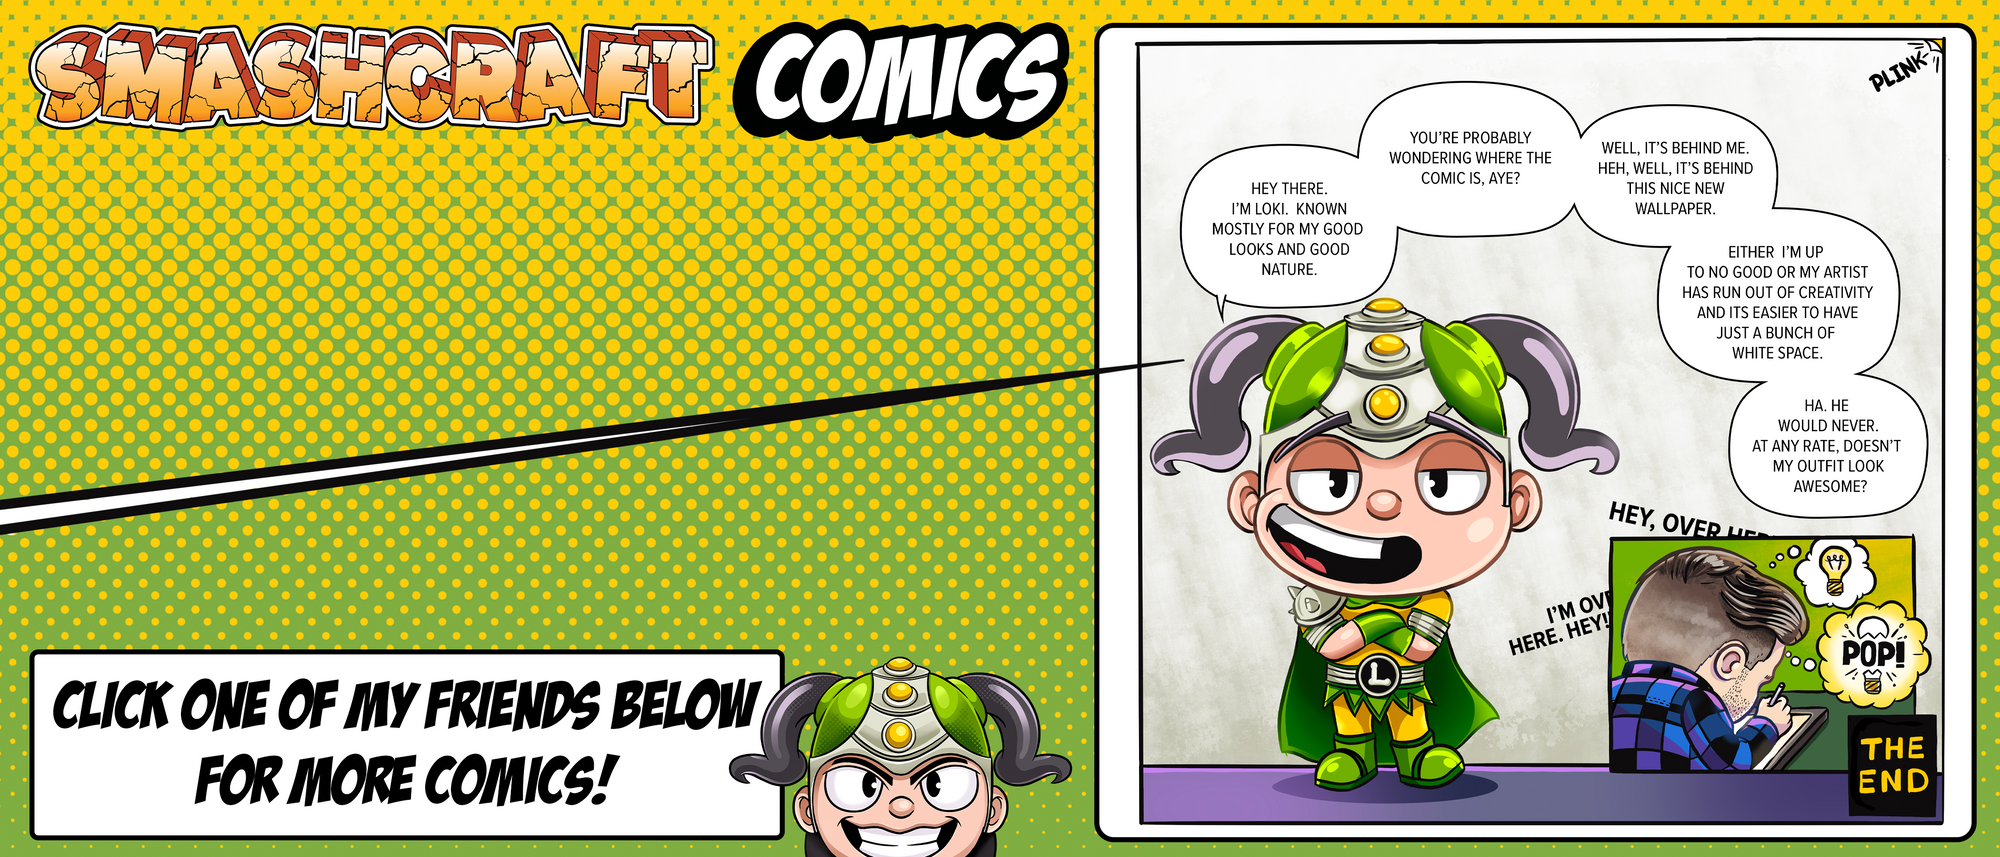 Comic strip with Loki surrounded by text bubbles stating, "Hey there I'm Loki. Known mostly for my good looks and good nature. You're probably wondering where the comic is, aye? Well its behind me heh, well behind the new wallpaper"